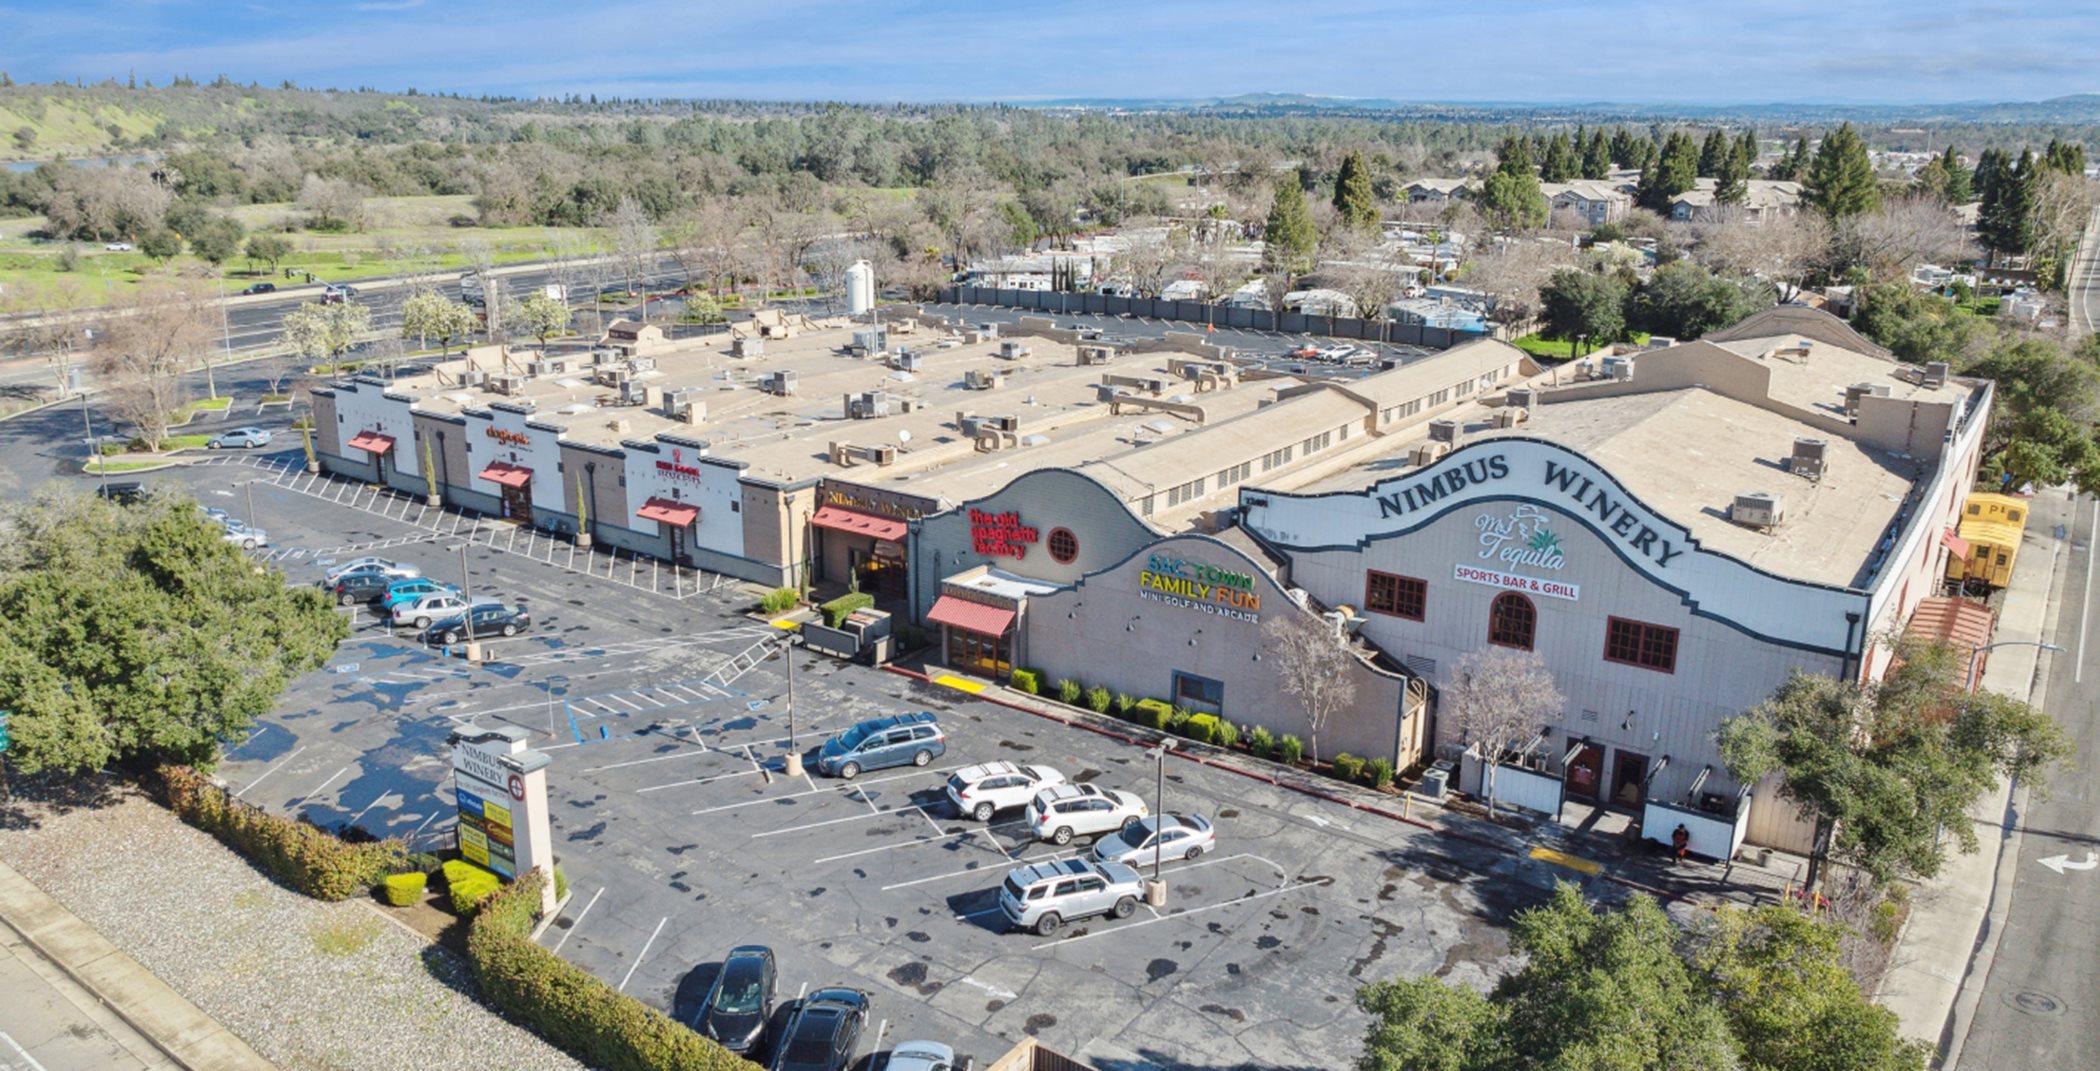 Aerial view of the building and parking lot